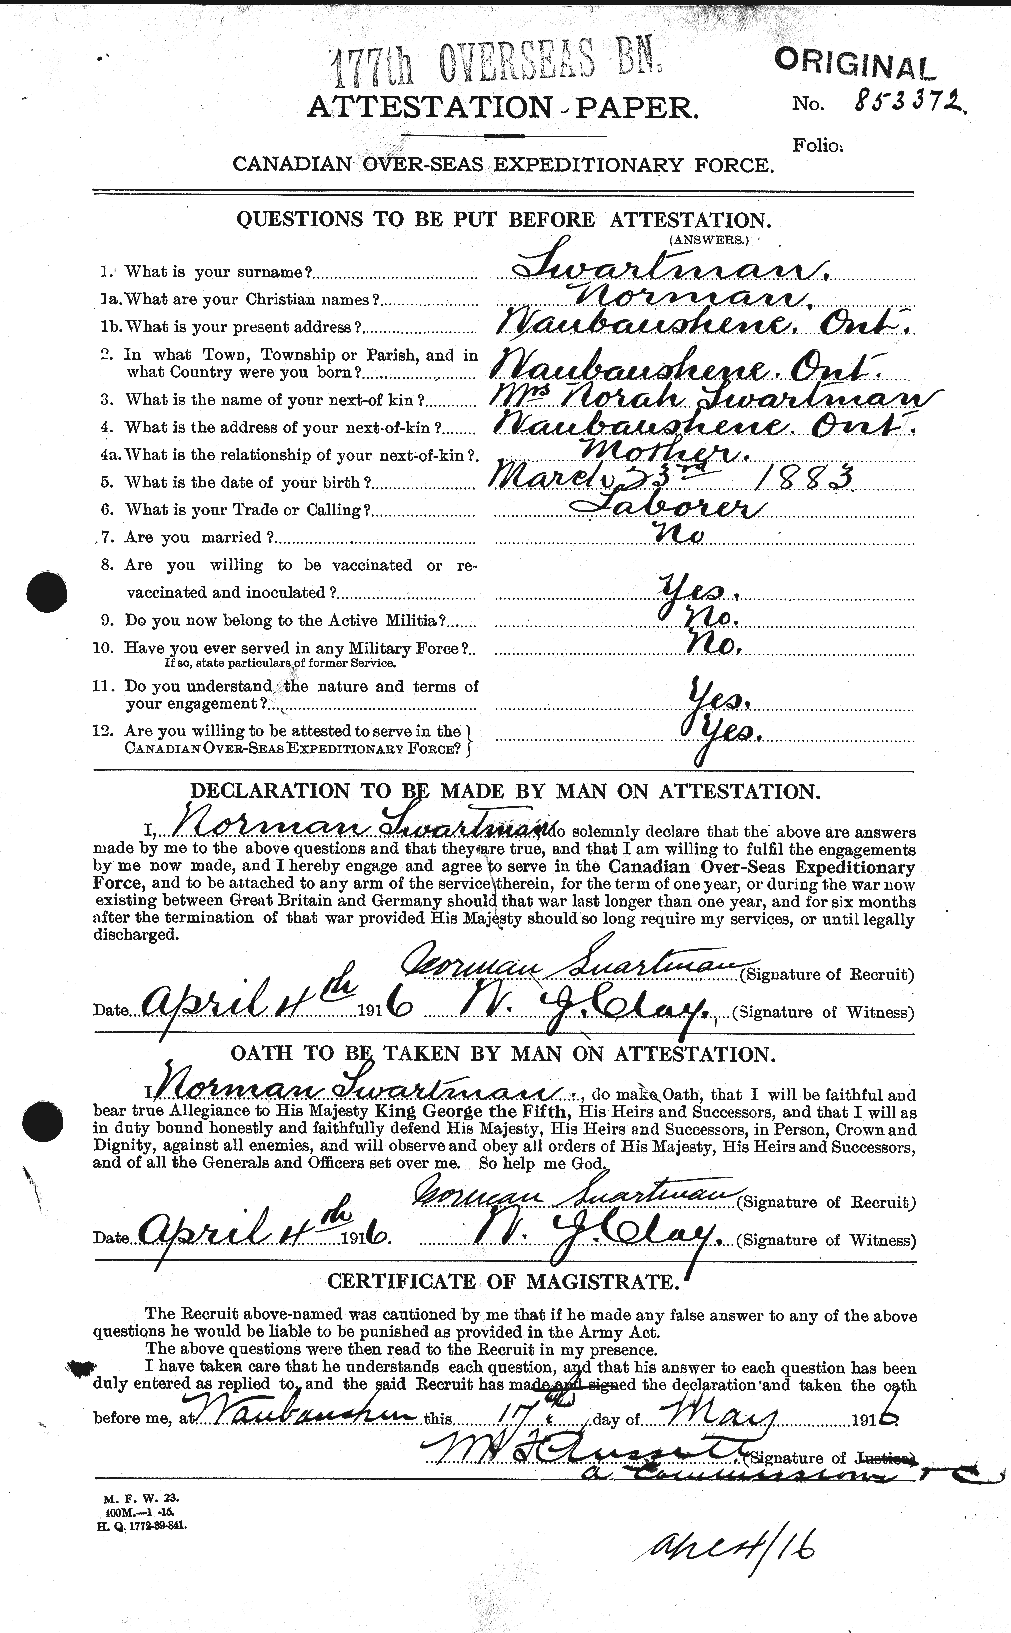 Personnel Records of the First World War - CEF 126362a